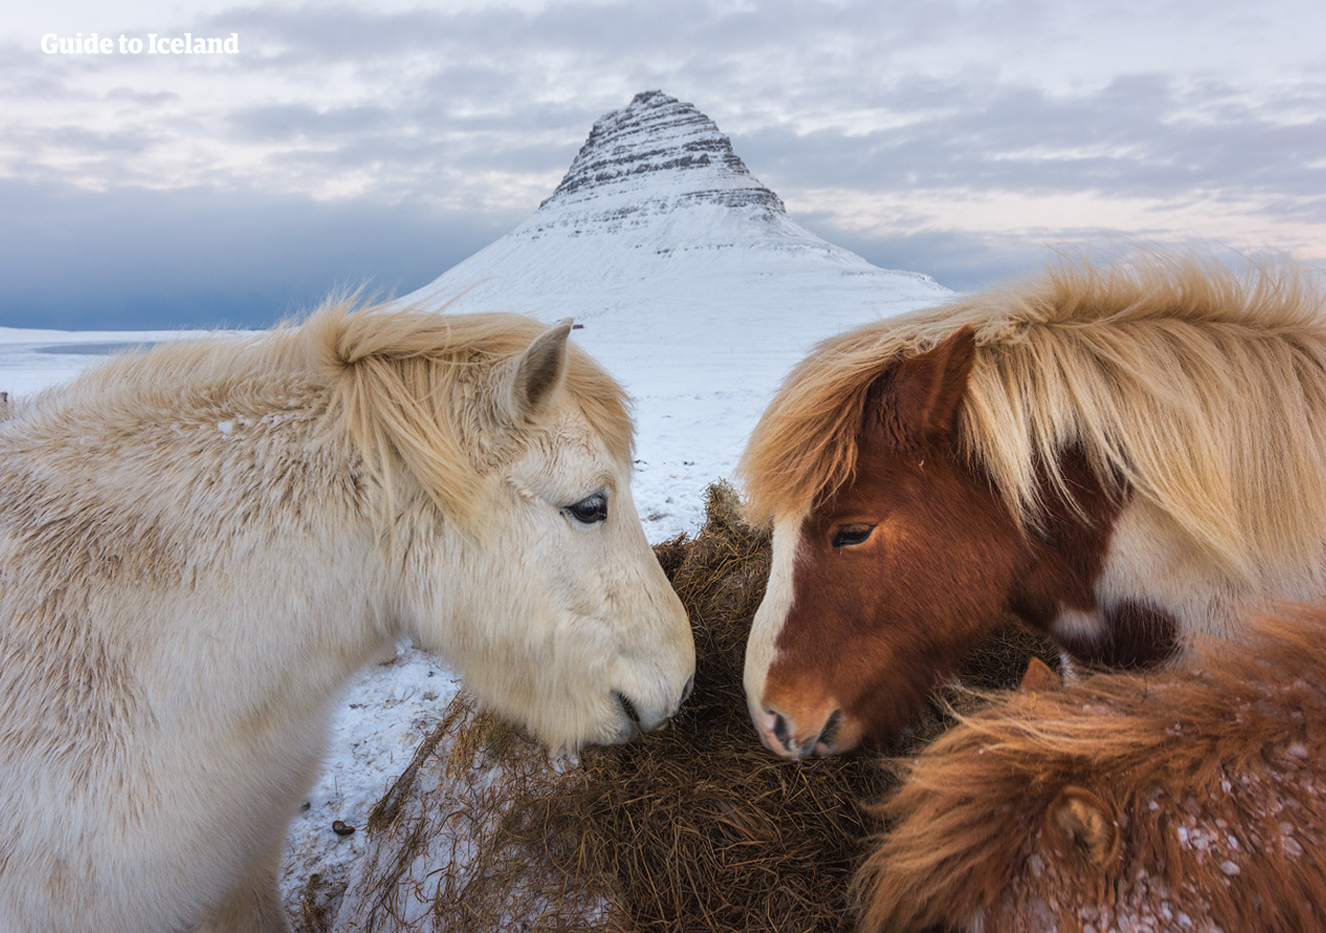 Icelandic horses in front of the picturesque mountain Kirkjufell on the Snæfellsnes Peninsula.